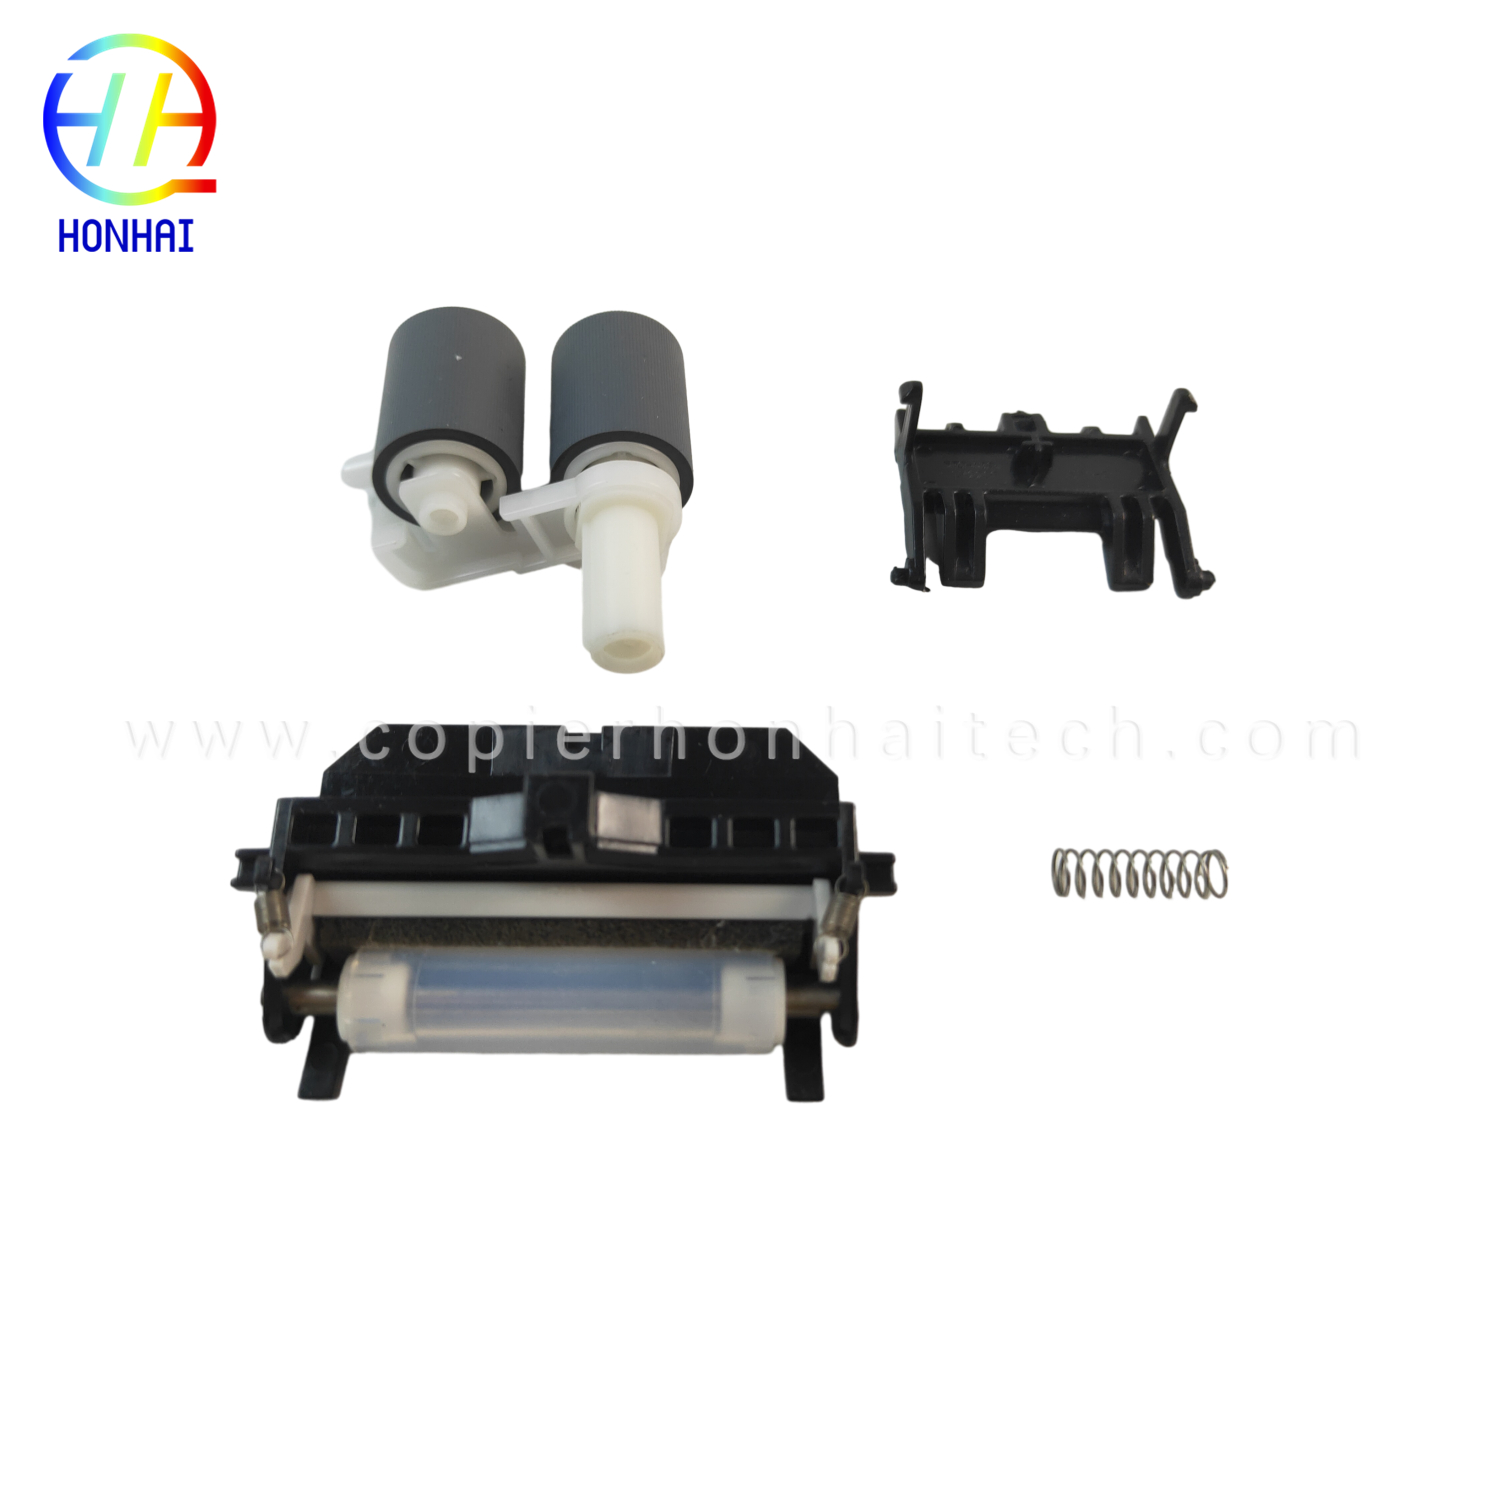 https://www.copierhonhaitech.com/pickup-feed-assemblies-and-separation-pad-kit-for-brother-dcp-l2540dw-product/